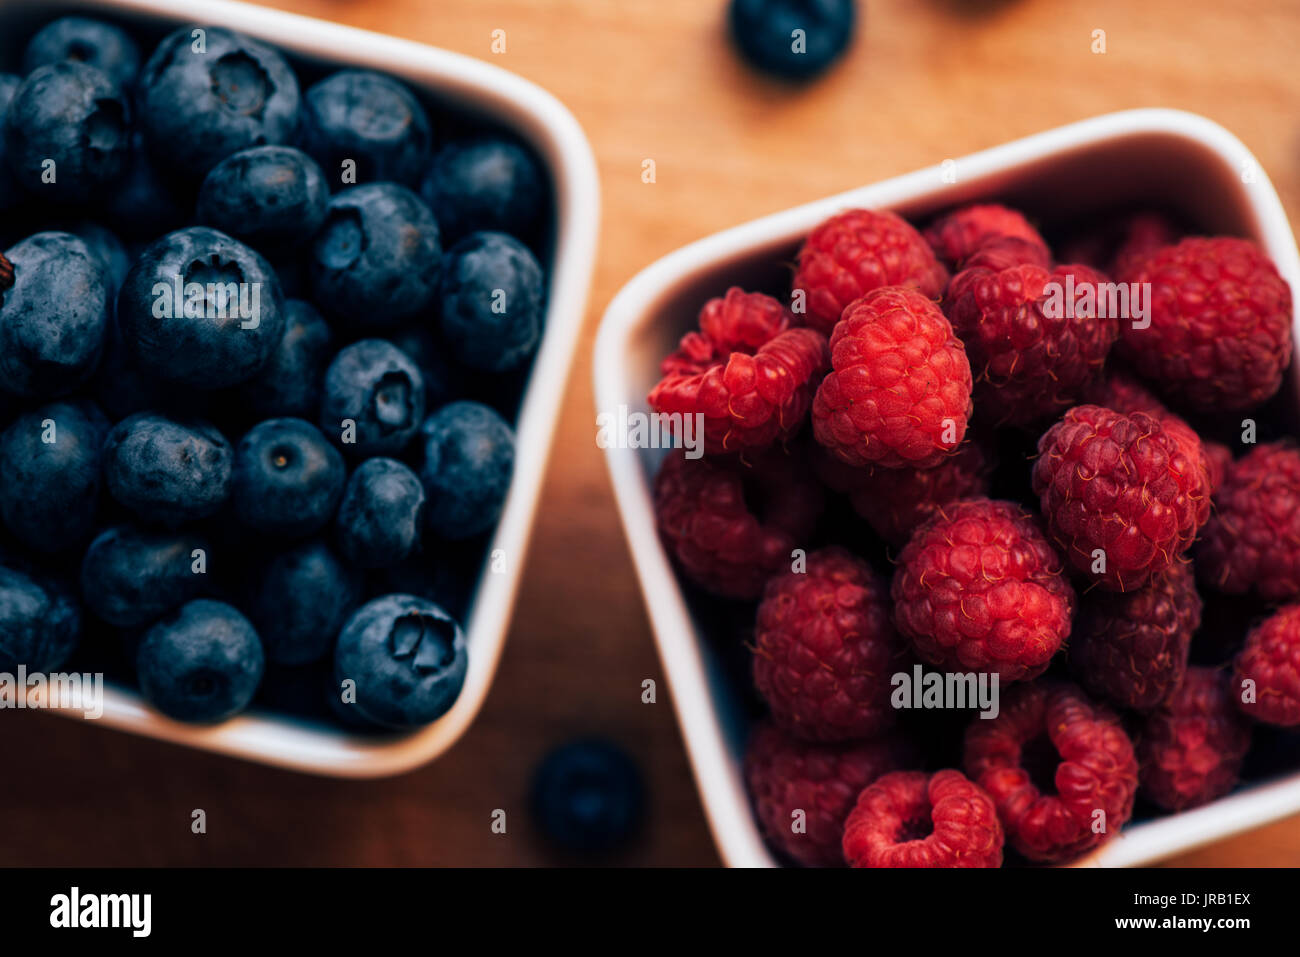 Blueberries and raspberries, healthy forest berry fruit, selective focus Stock Photo